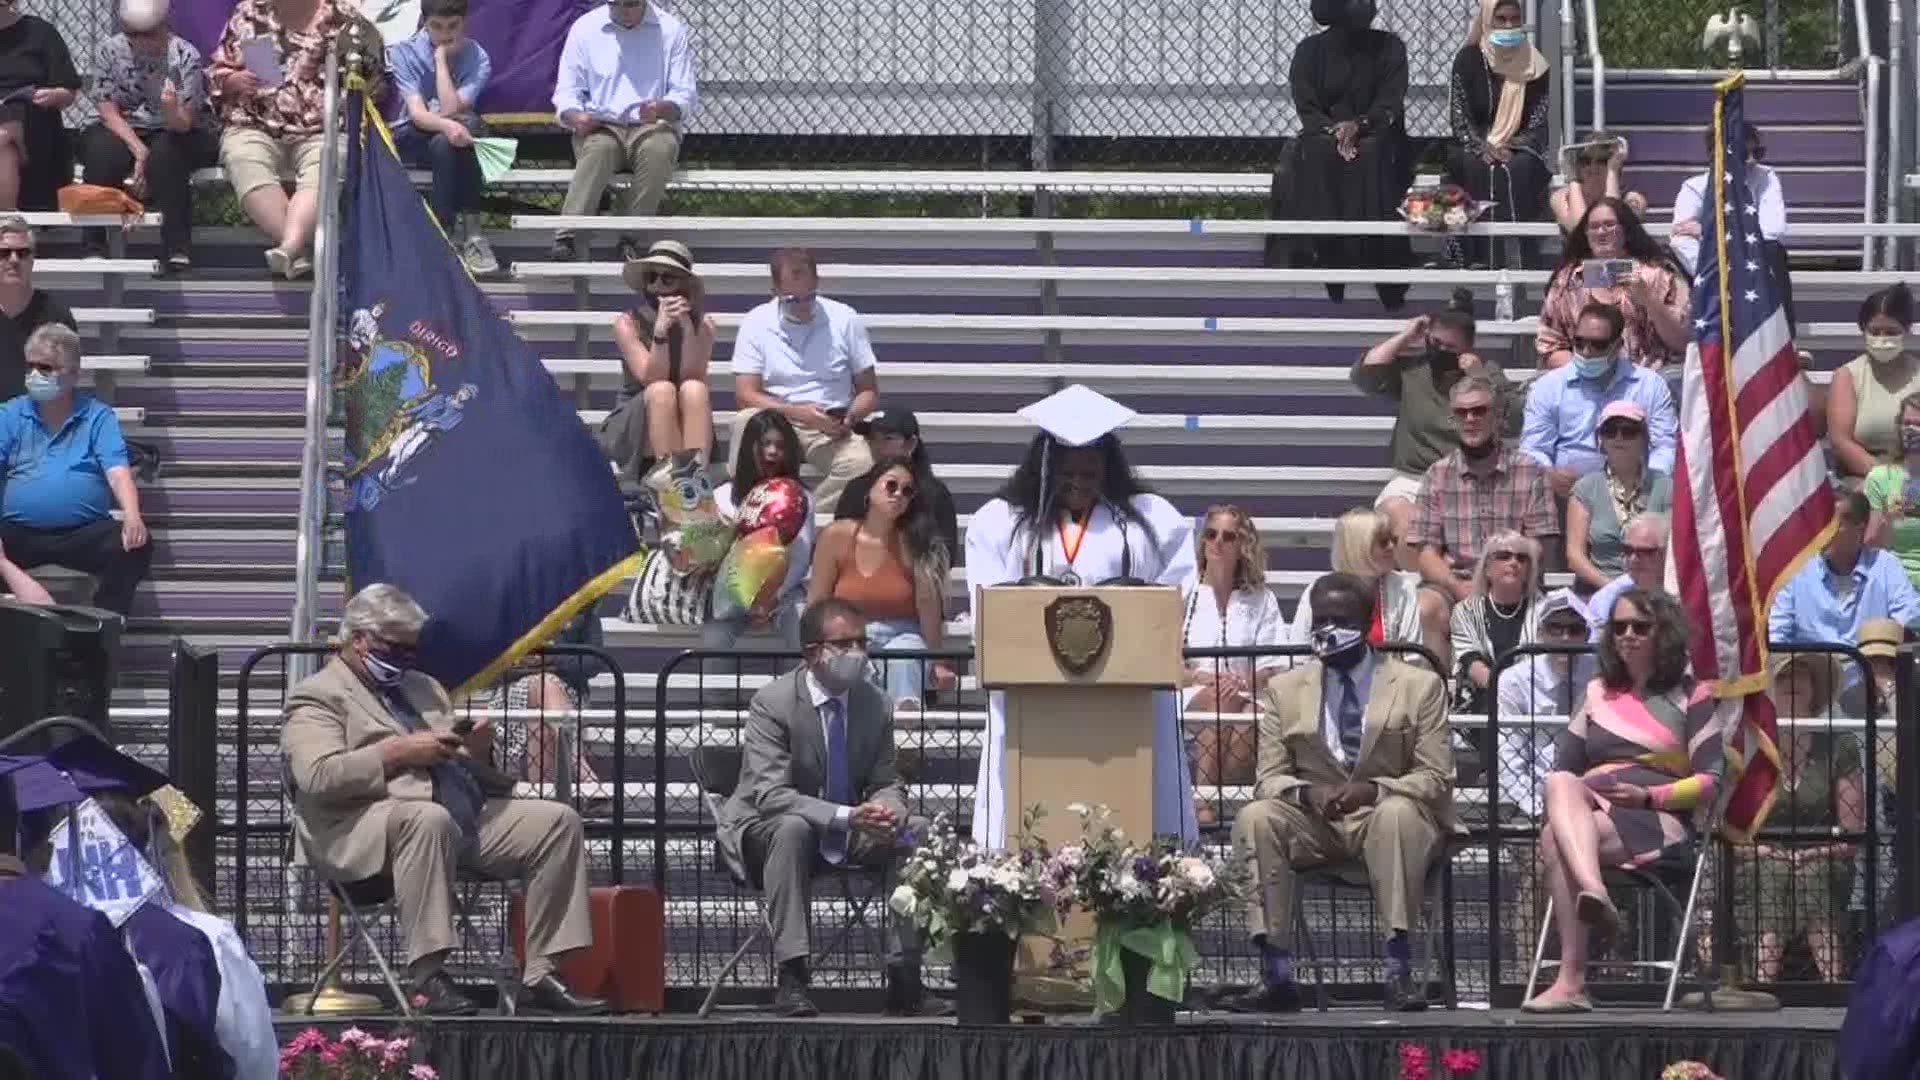 With masks and distancing measures in place -- the Deering High School class of 20-21 graduated on Wednesday morning.